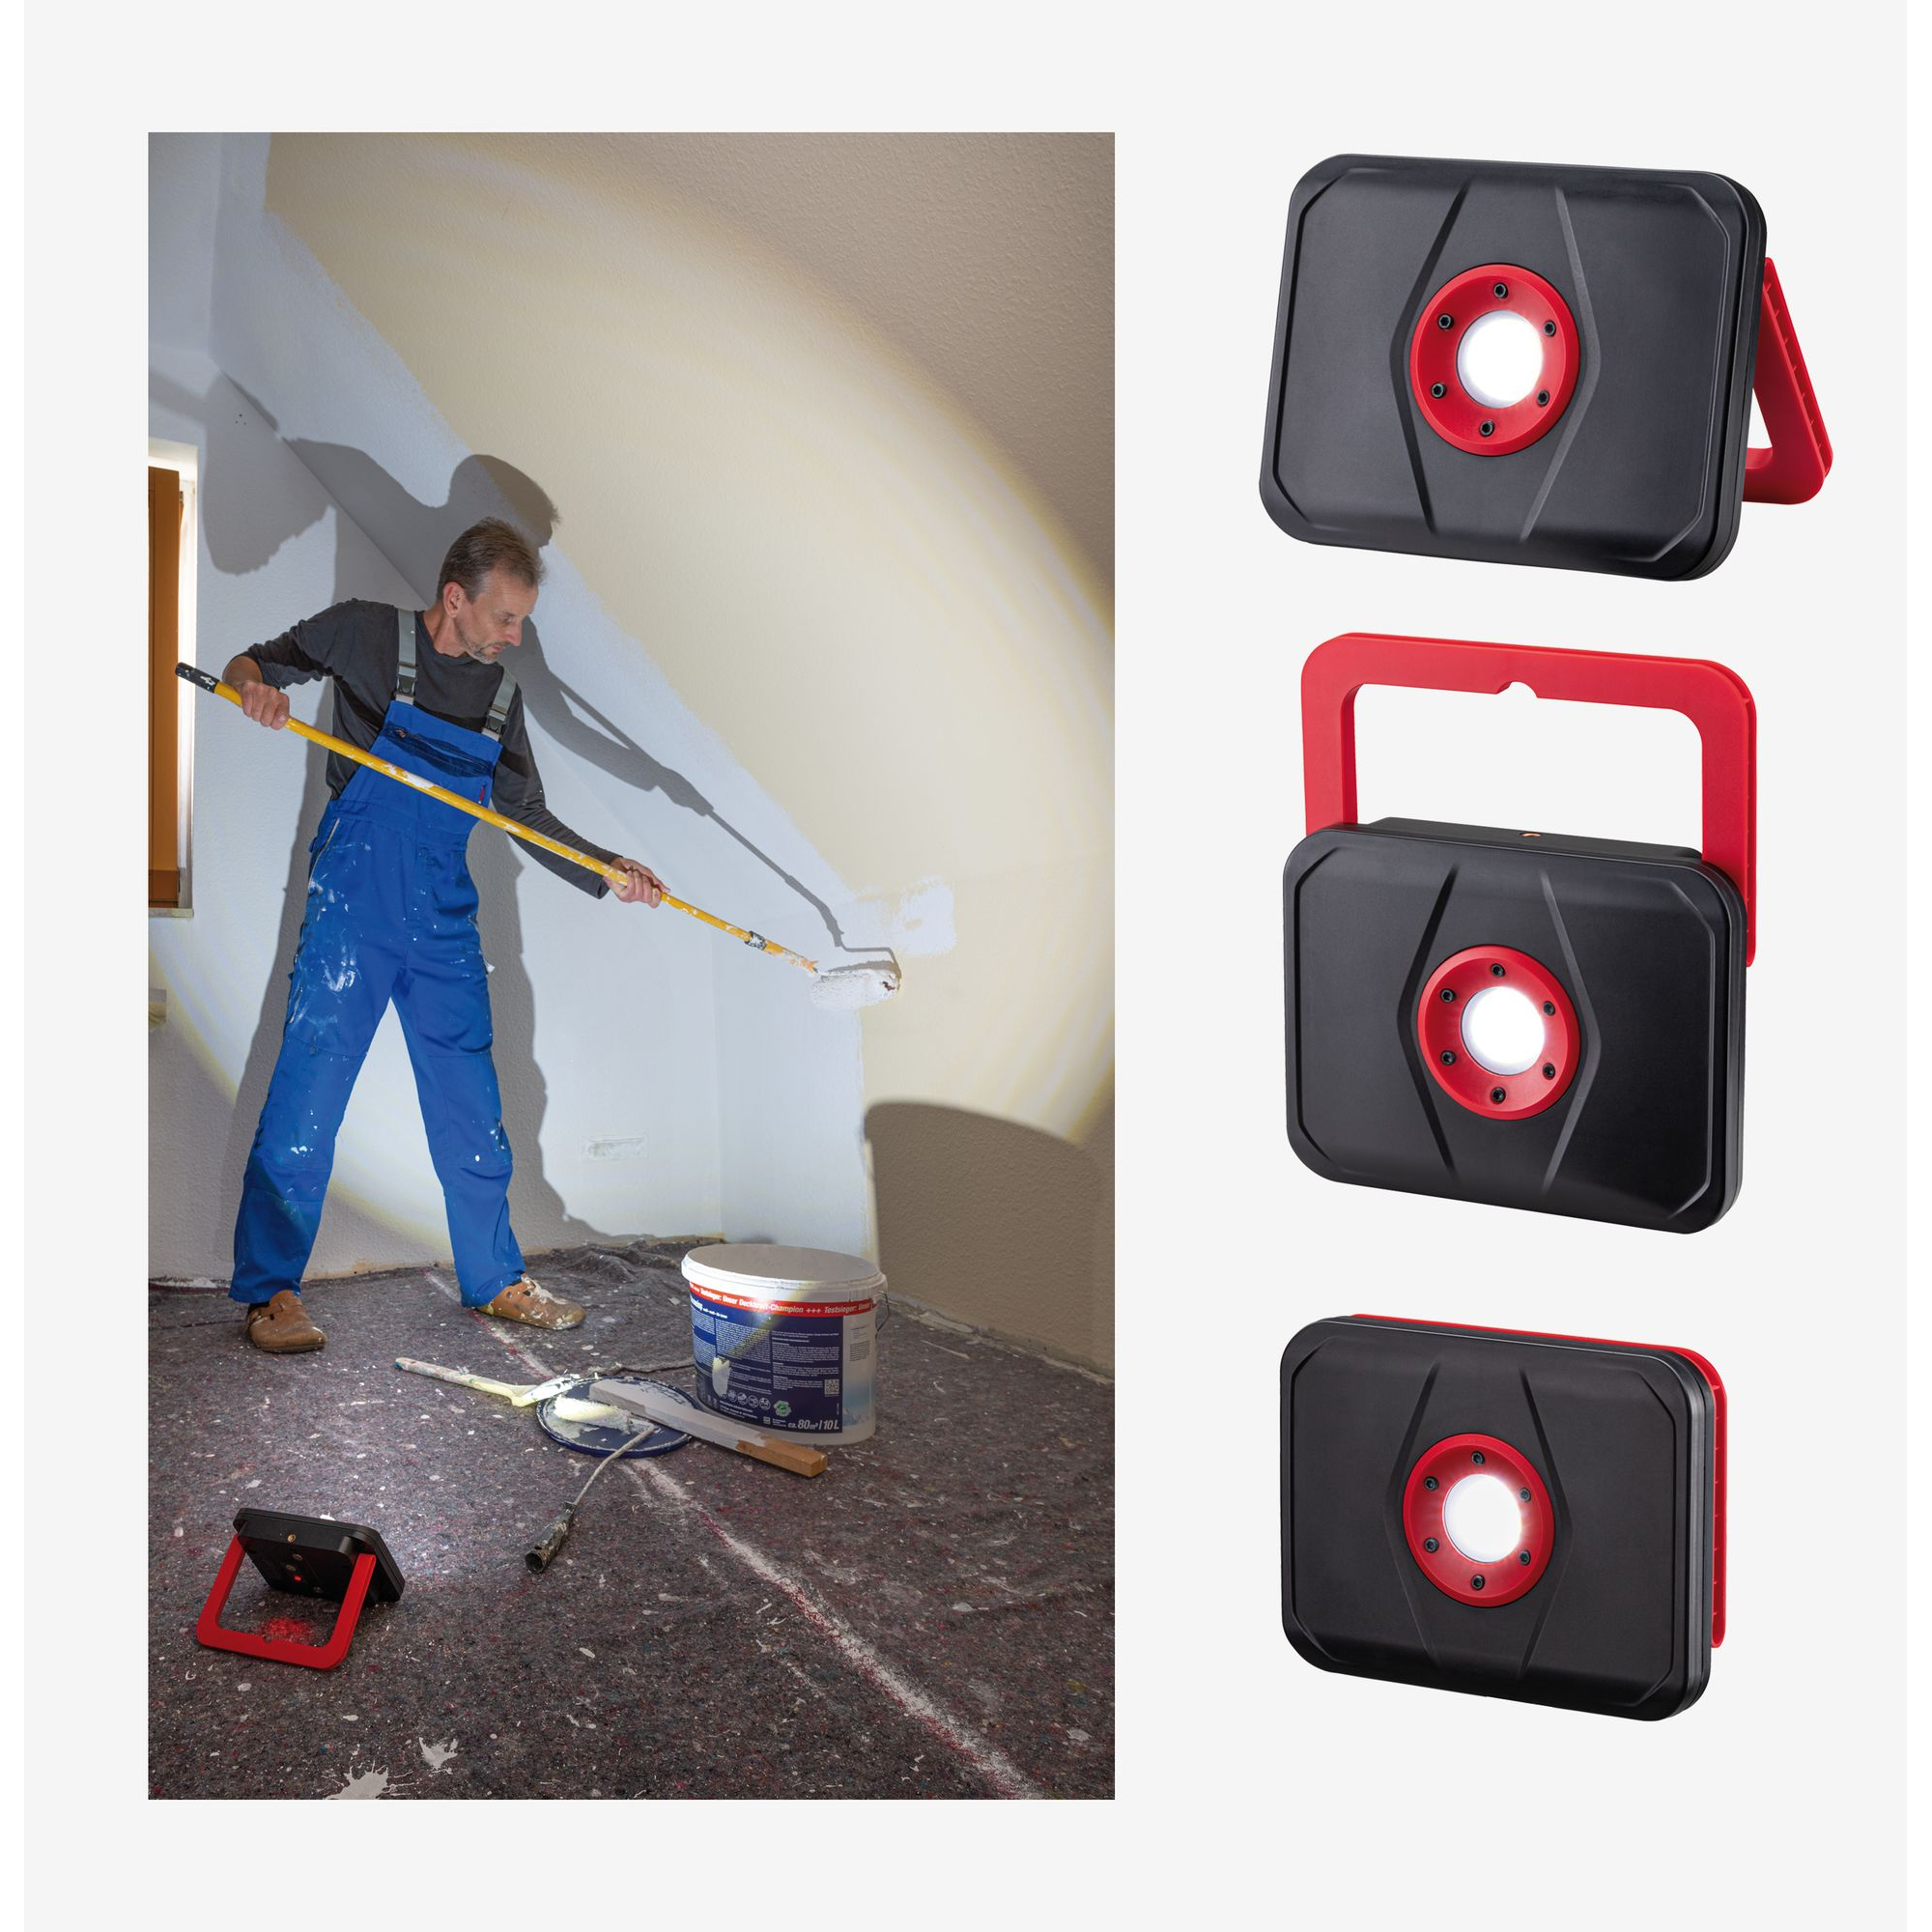 Akku-Baustrahler 'Mobile Worklight' rot/schwarz 15 W 1200 lm + product picture